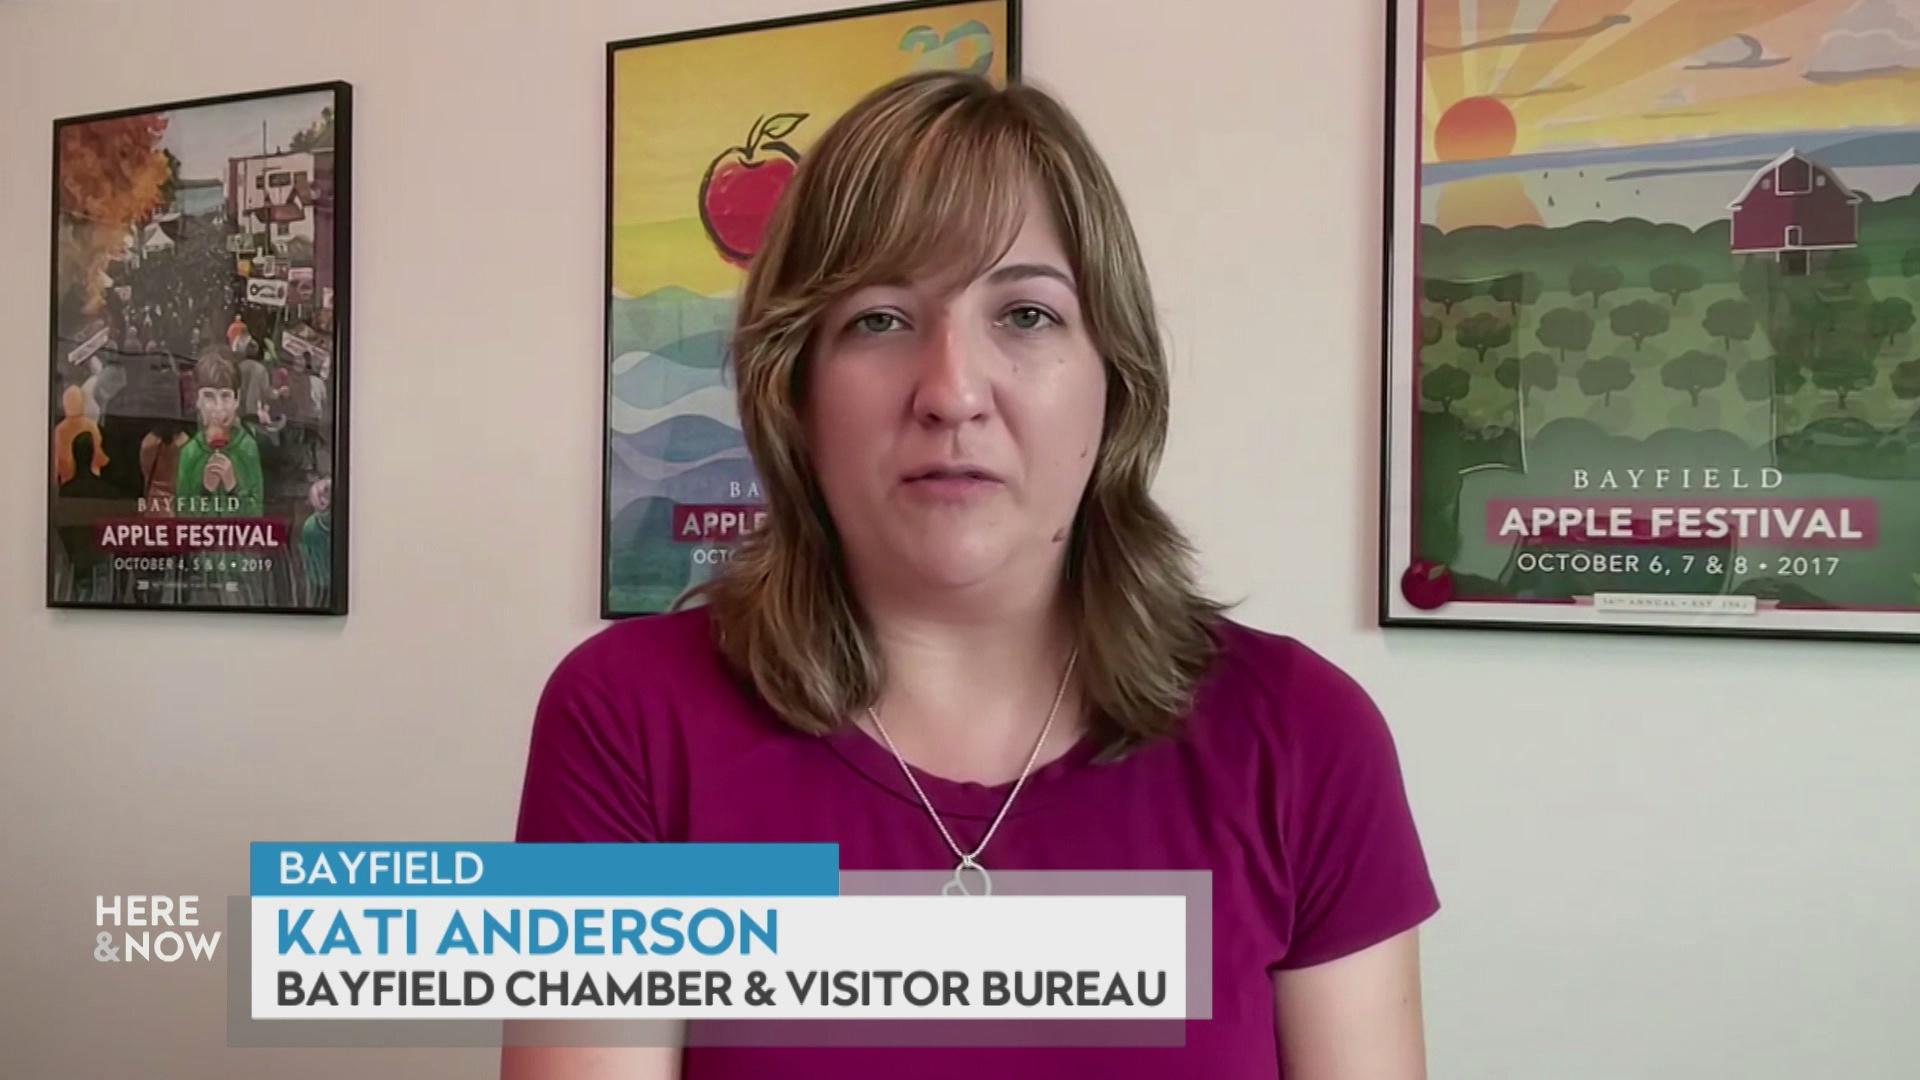 A still image from a video shows Kati Anderson seated in front of three framed posters, each reading 'Bayfield Apple Festival' with a graphic at bottom reading 'Bayfield,' 'Kati Anderson' and 'Bayfield Chamber & Visitor Bureau.'